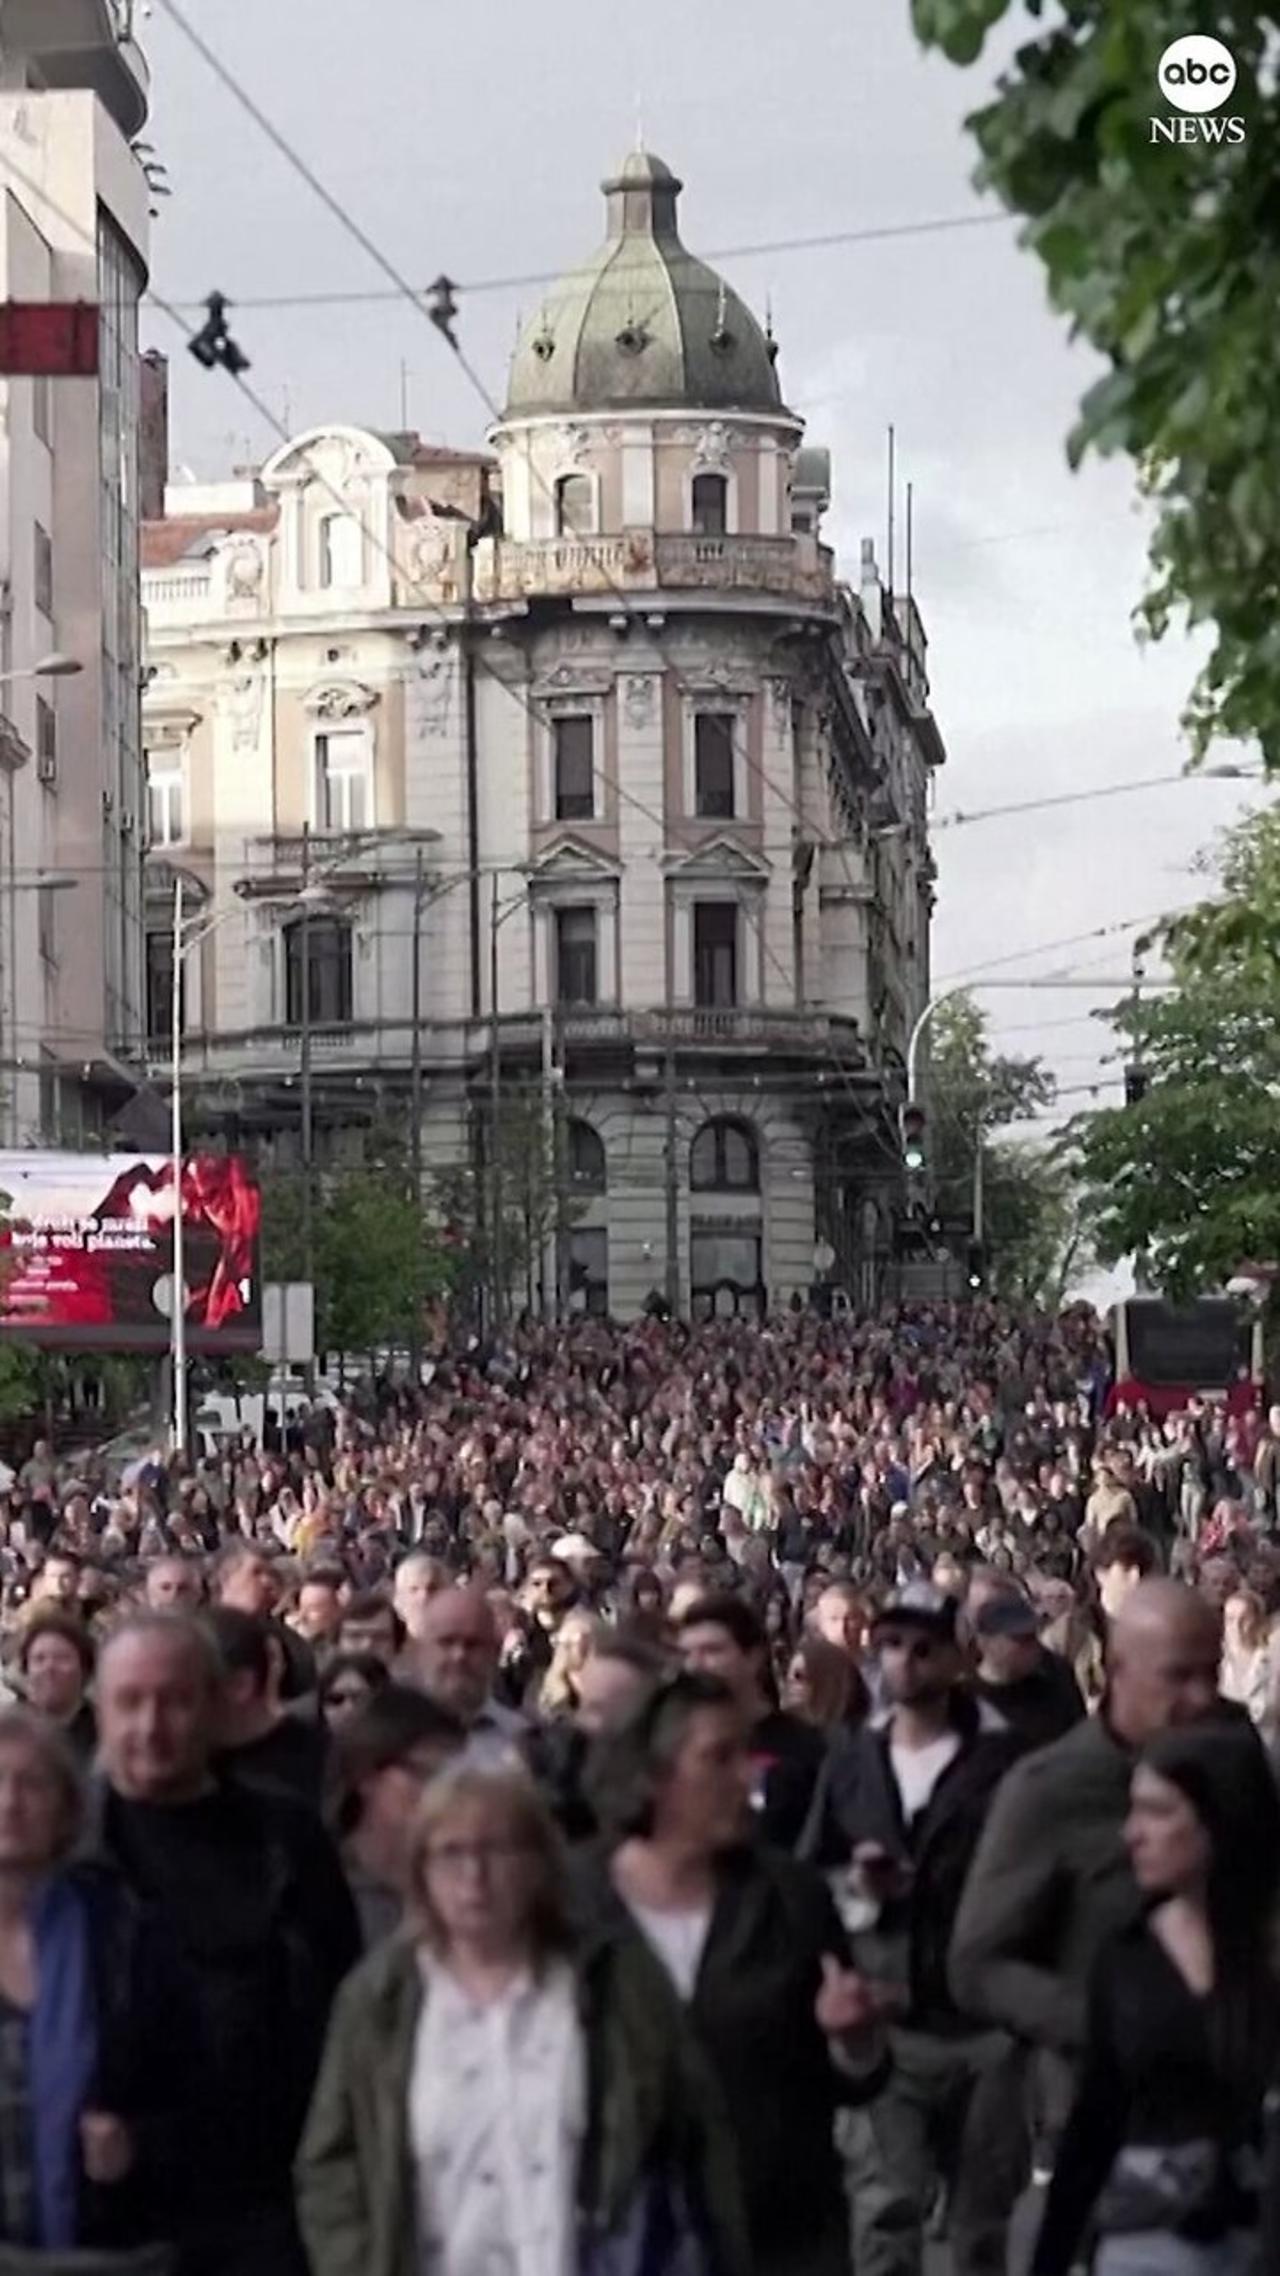 Thousands of demonstrators took to the streets of Serbia’s capital city